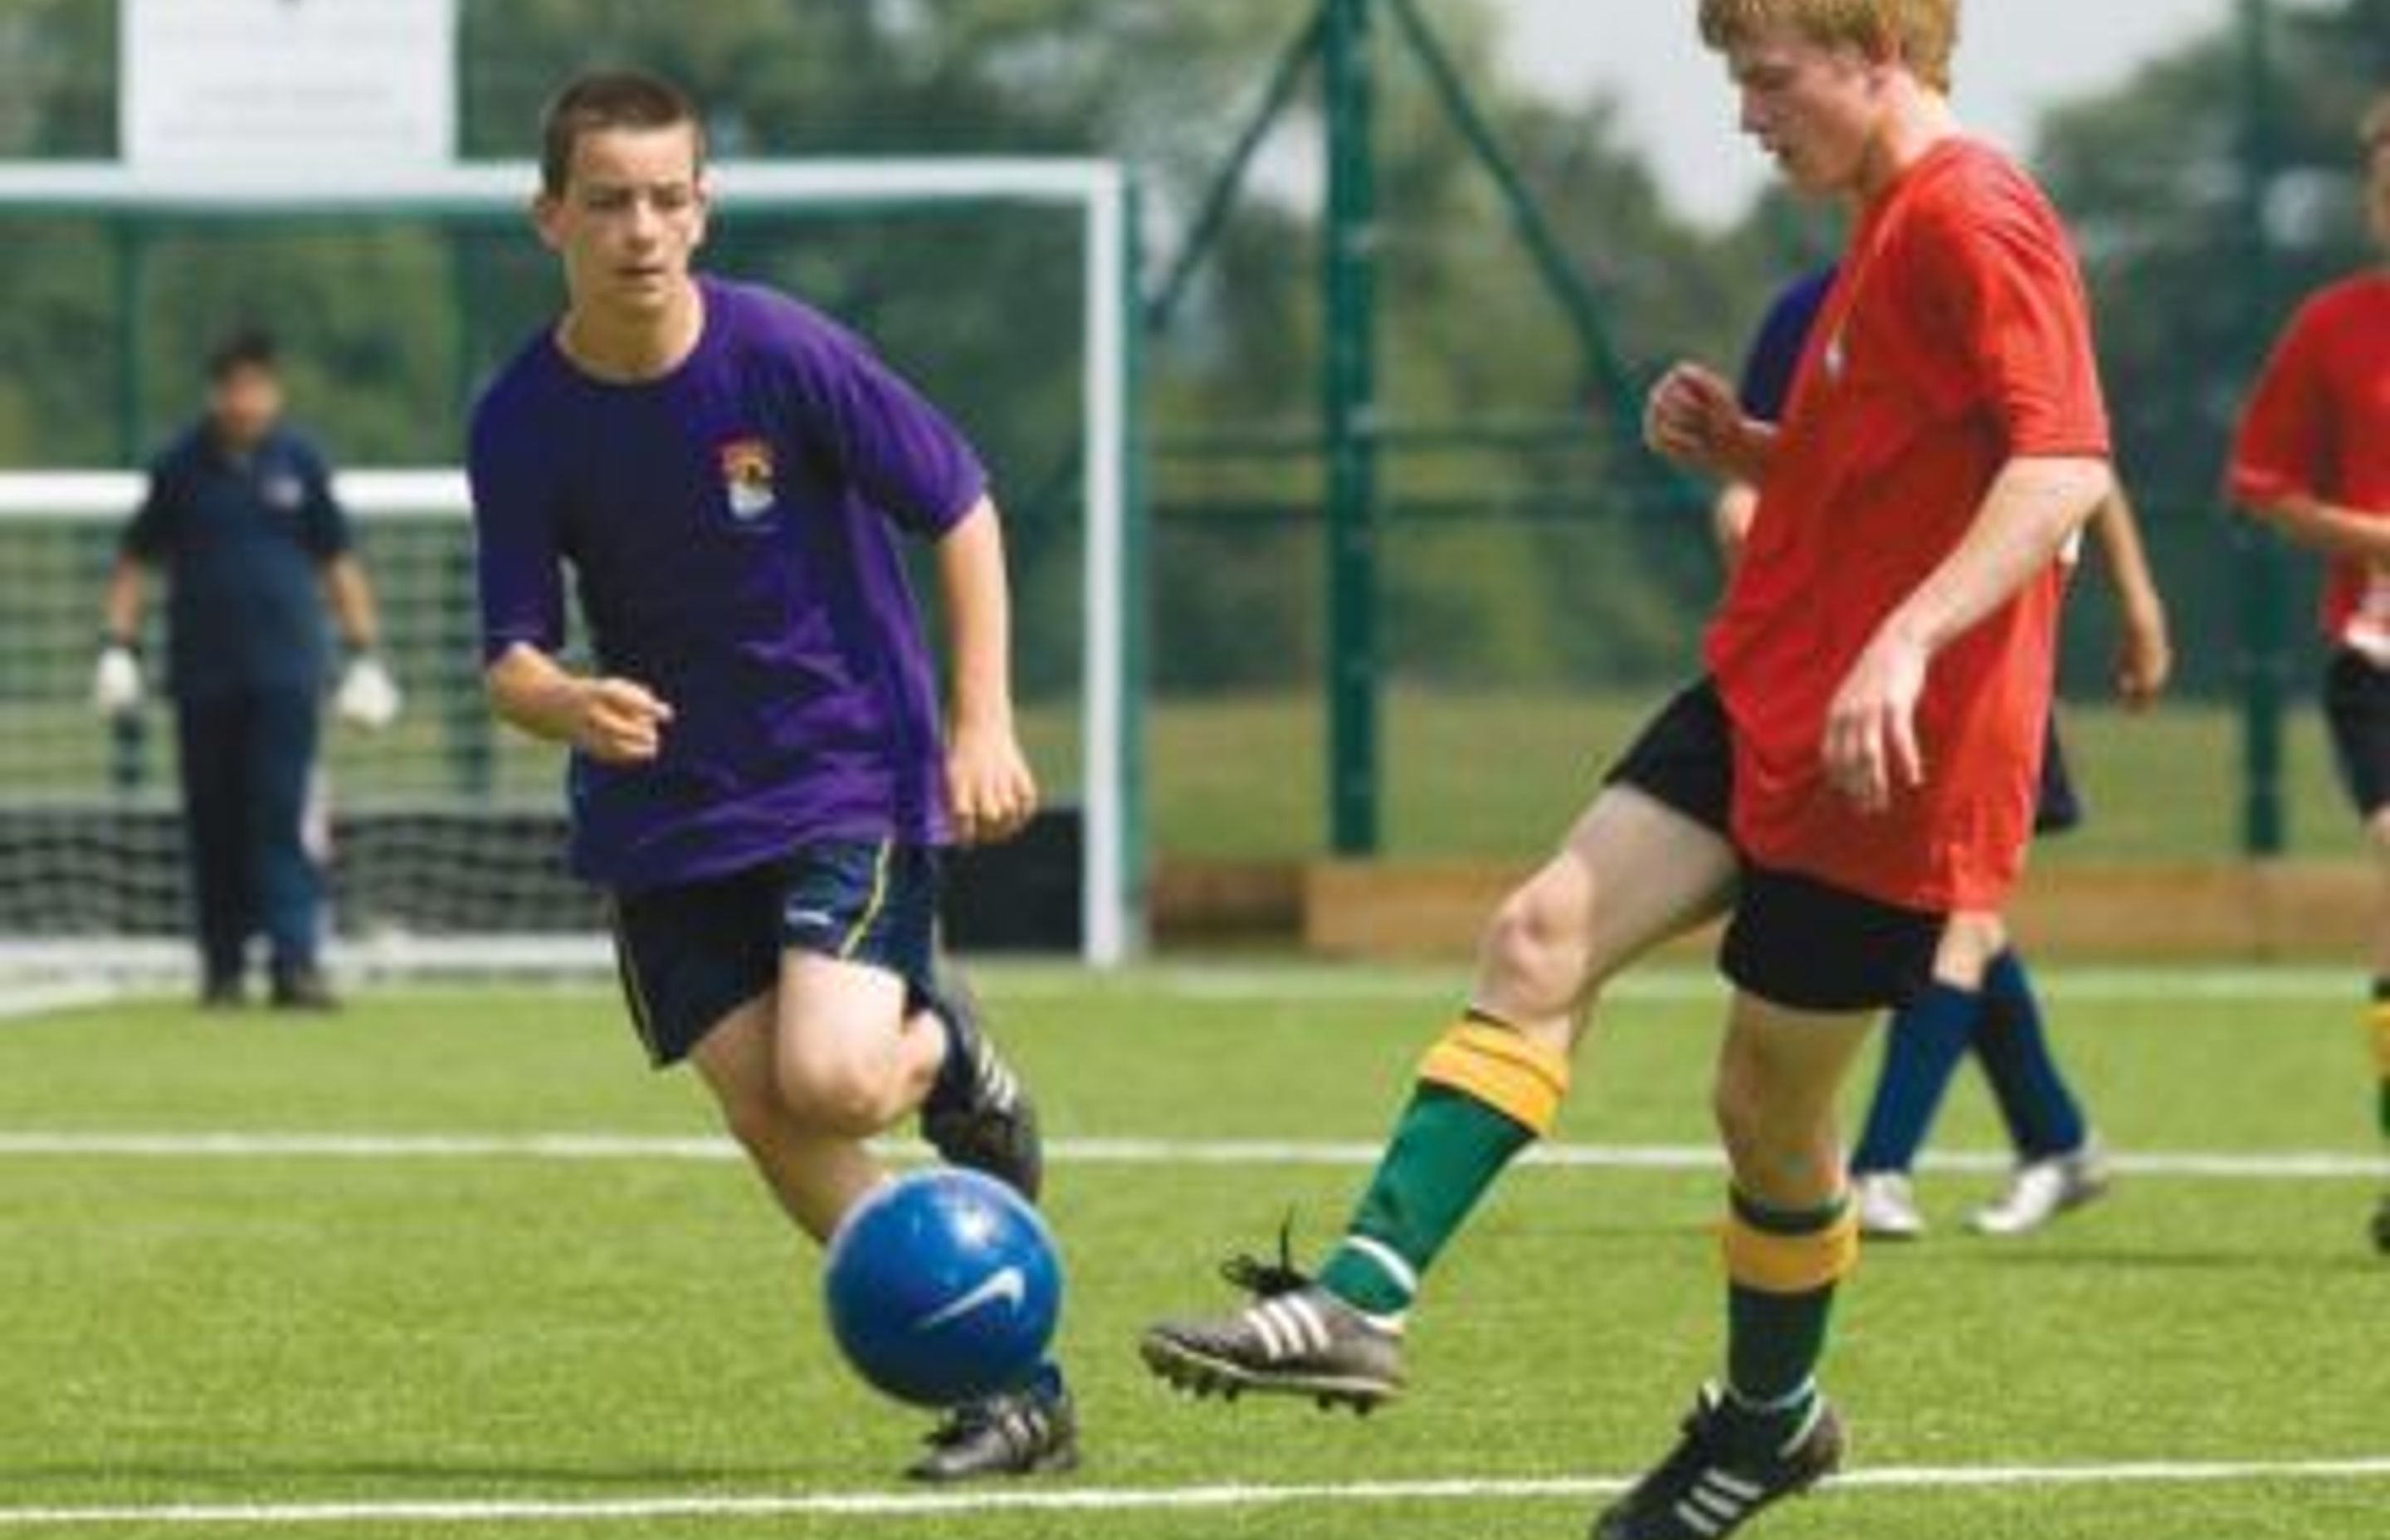 Football on Artificial Turf: The Top Five Benefits